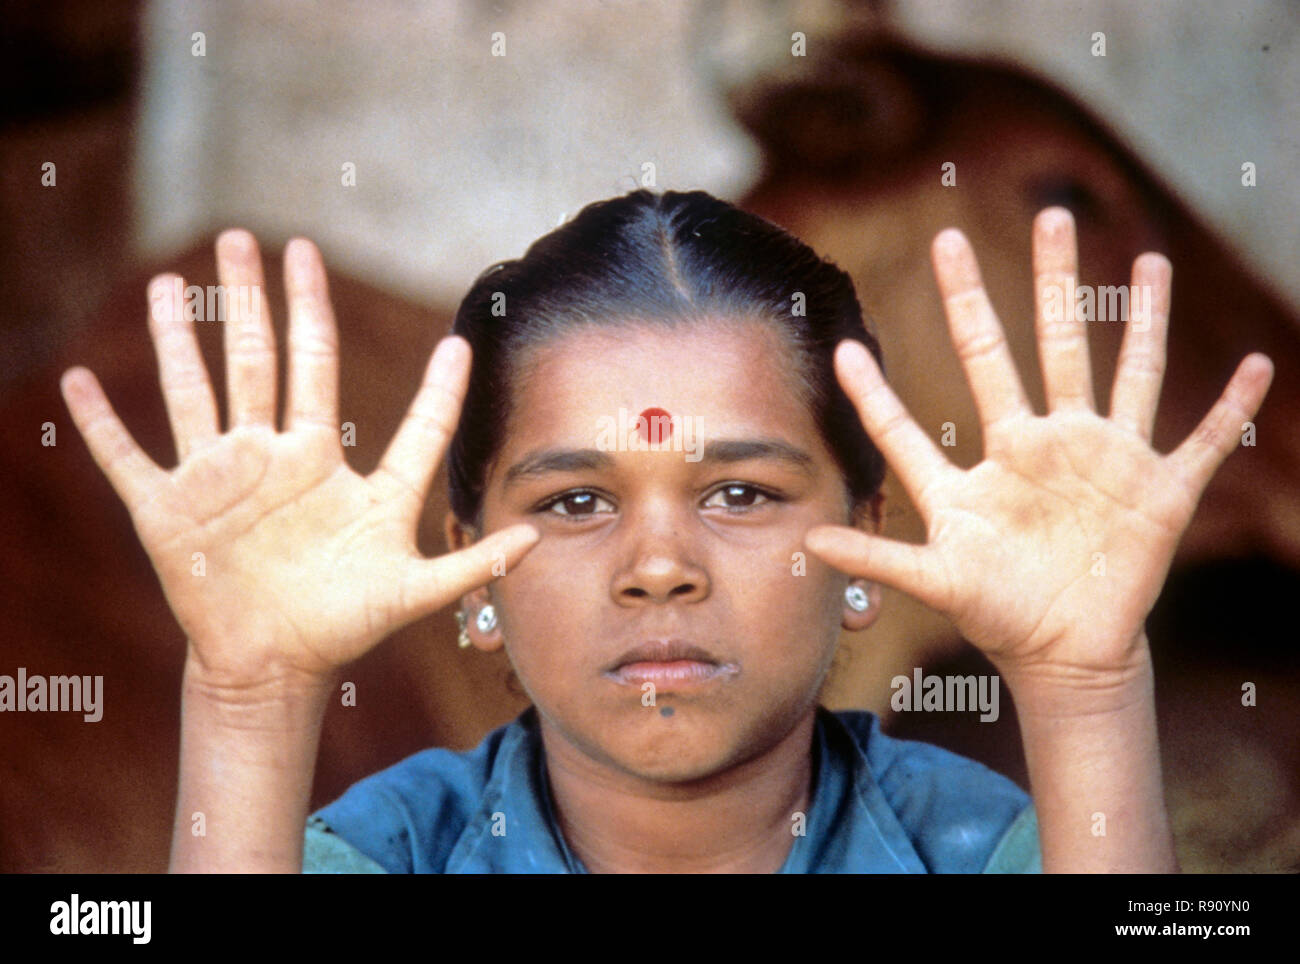 Girls Showing Six Fingers, Photo Feature, india Stock Photo